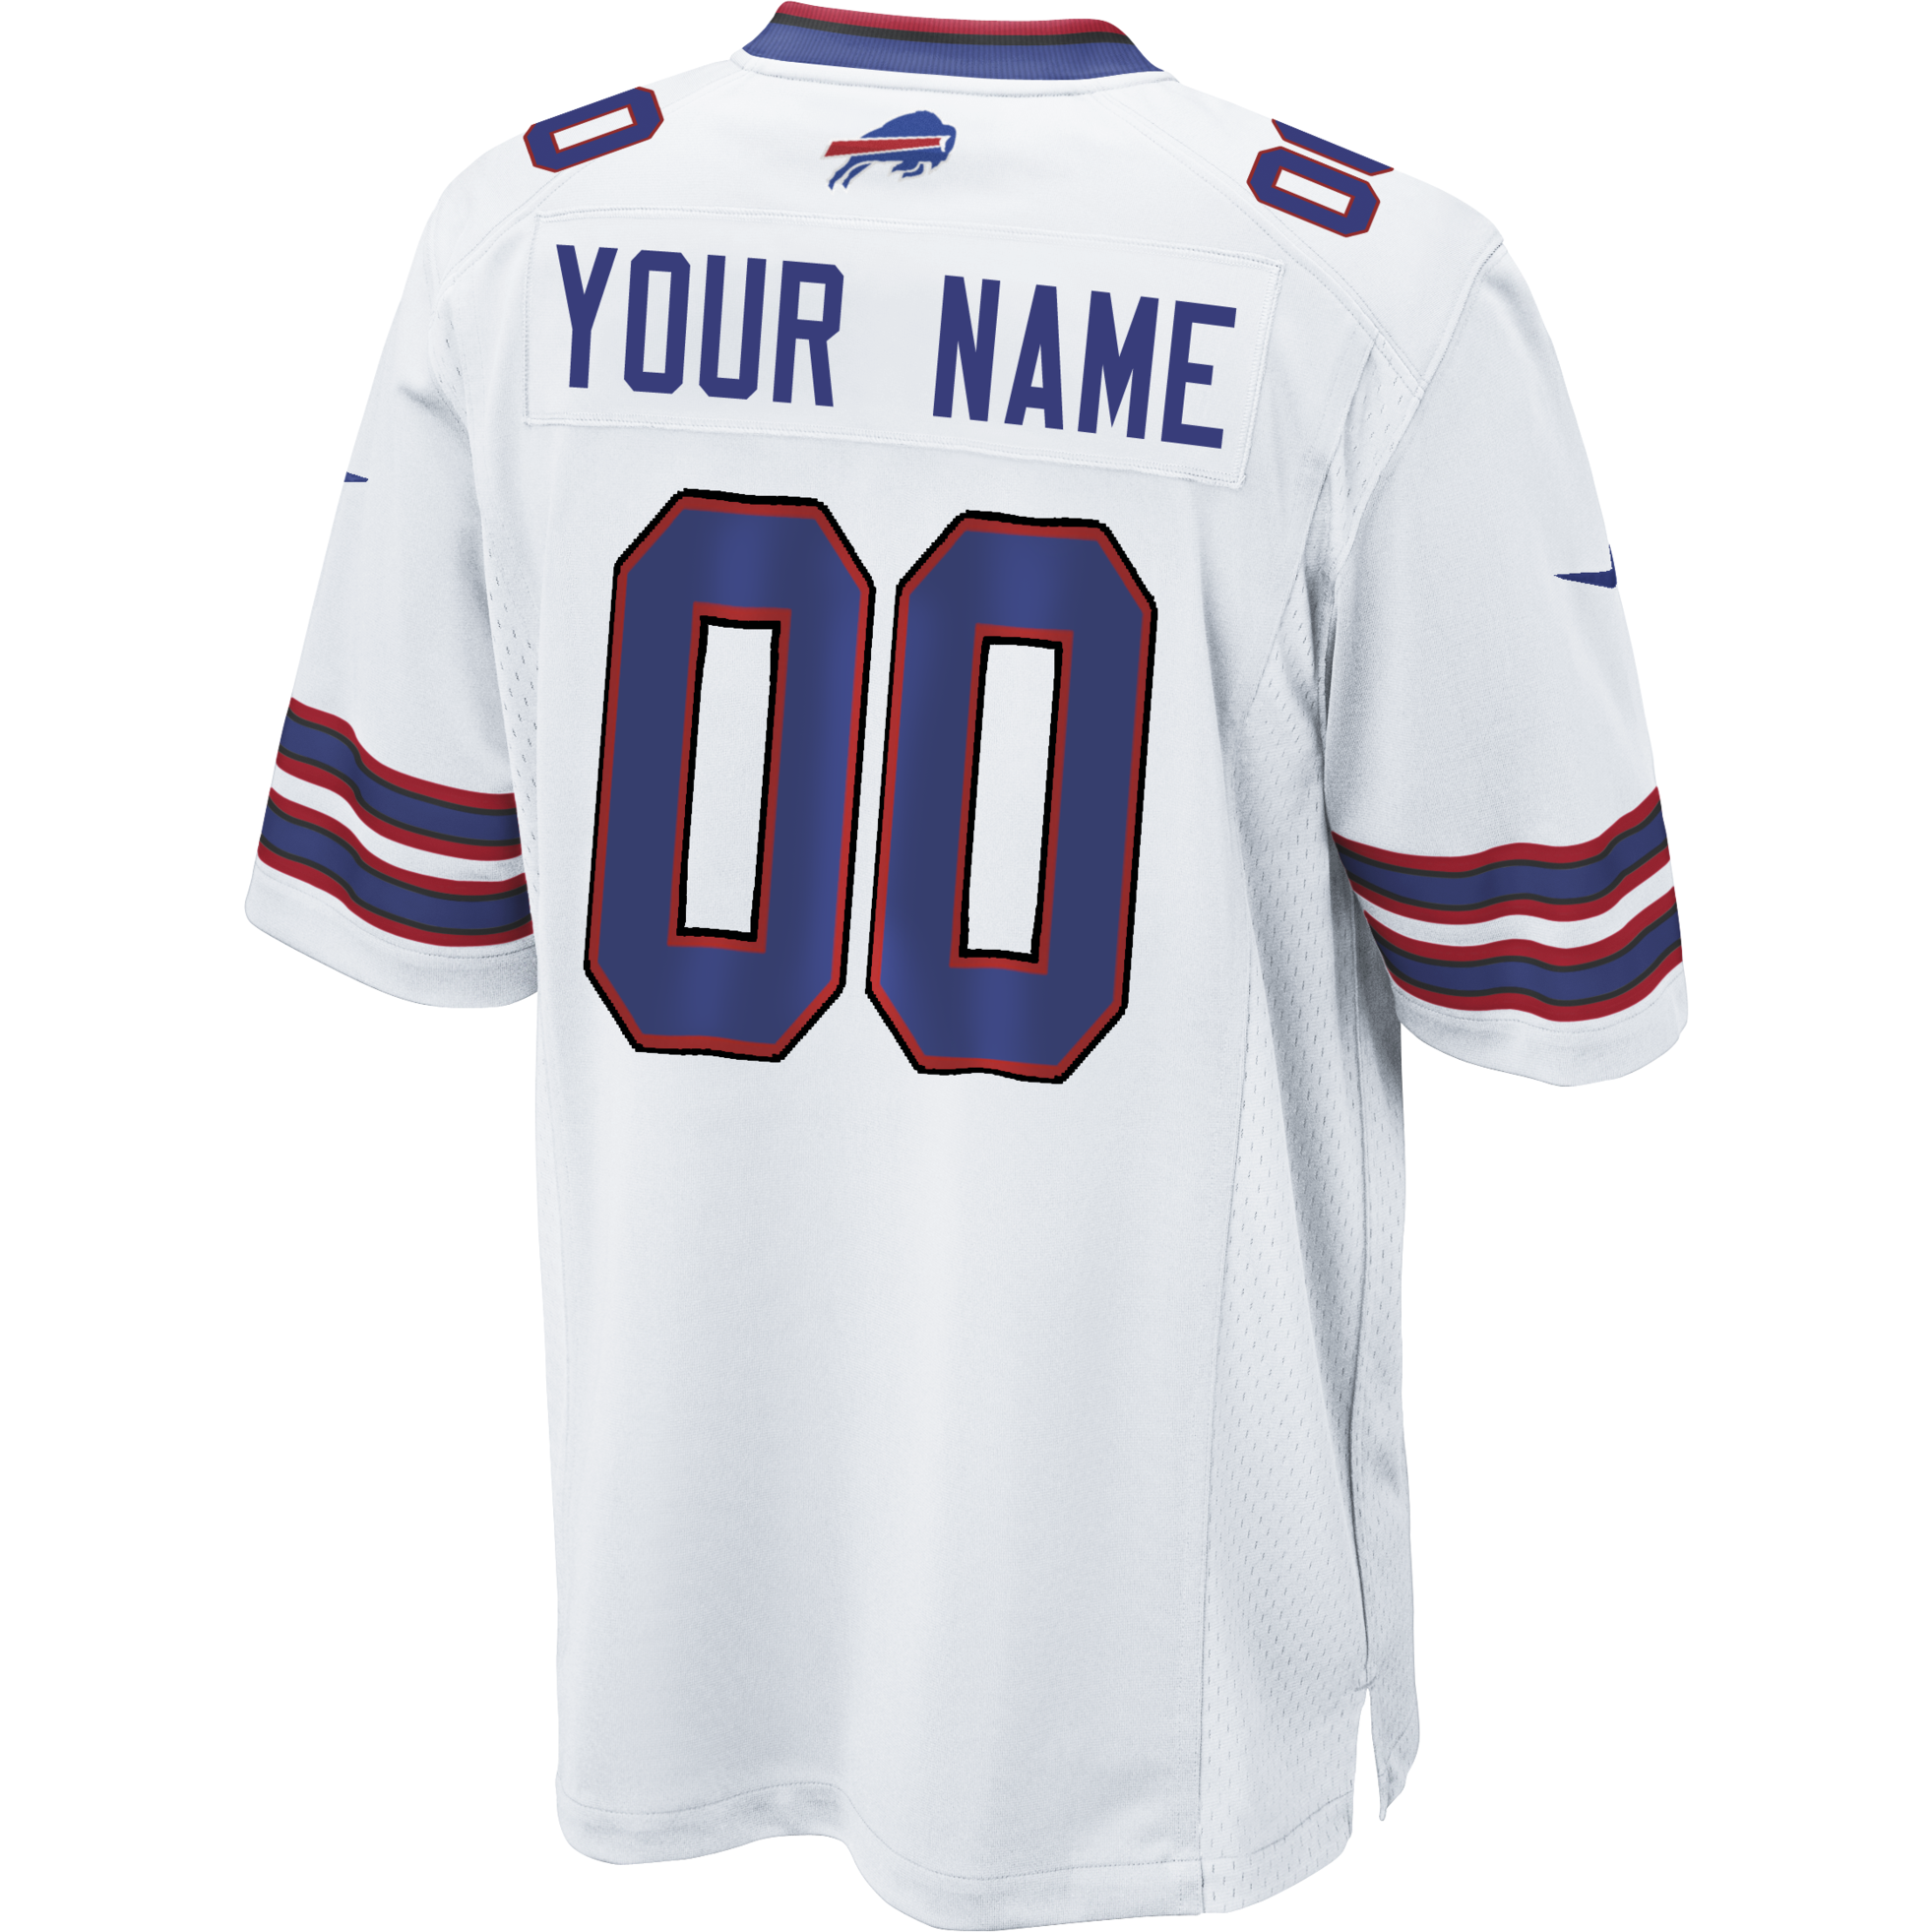 number one nfl jersey sold